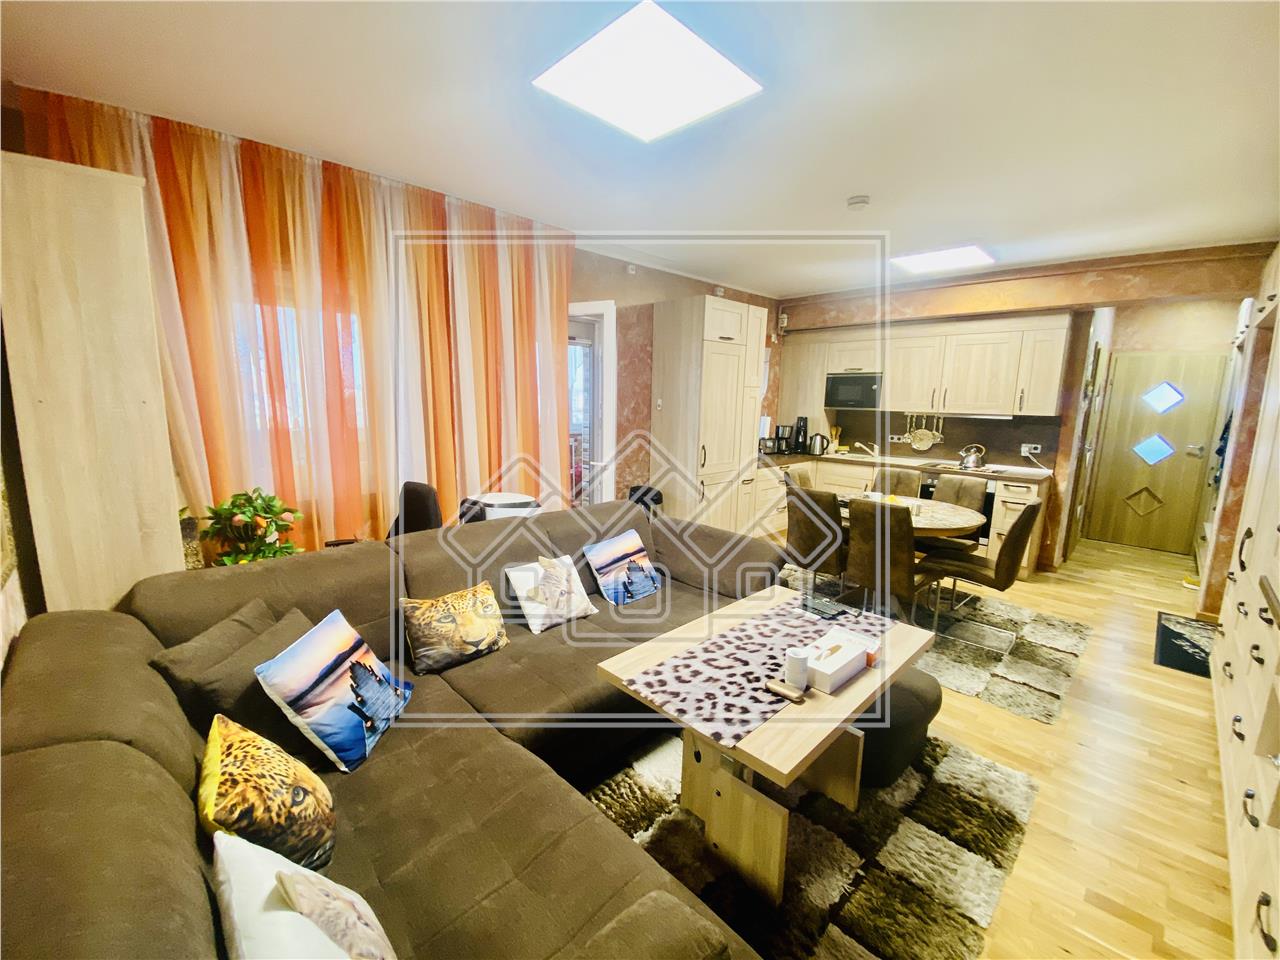 Apartment for sale in Sibiu - 2 rooms and balcony - modern furnished a